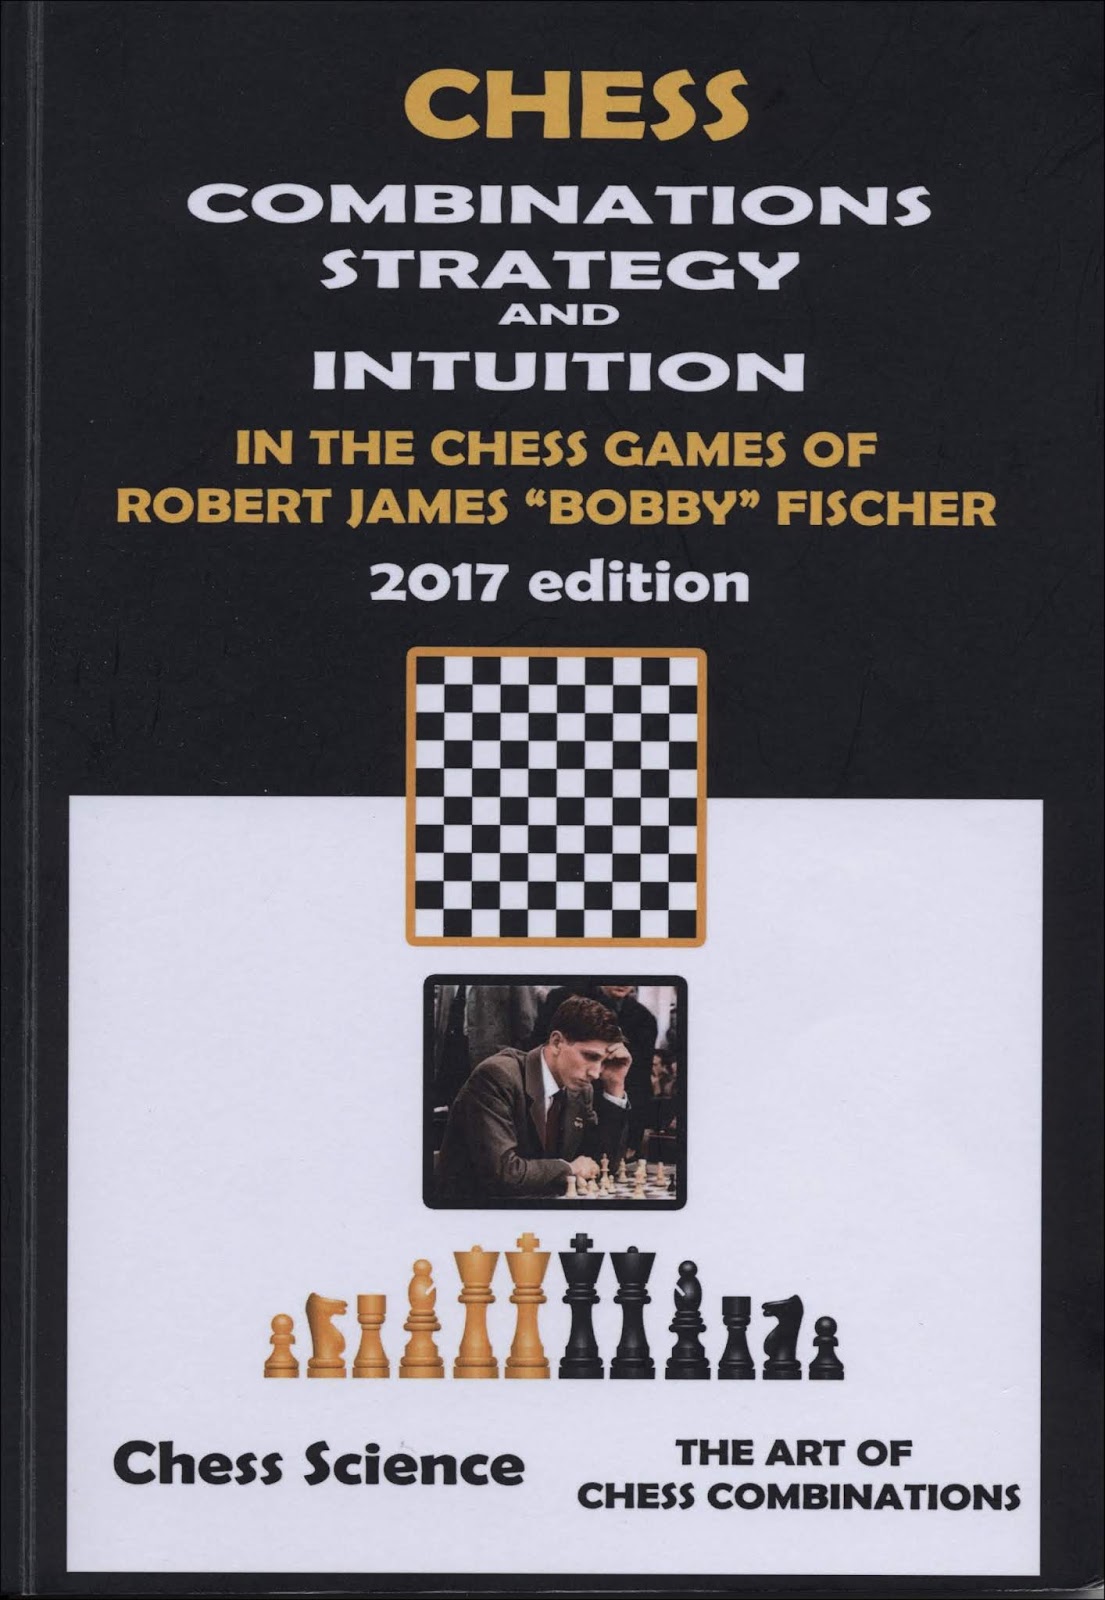 Chess Book Chats: A shambolic book on Fischer